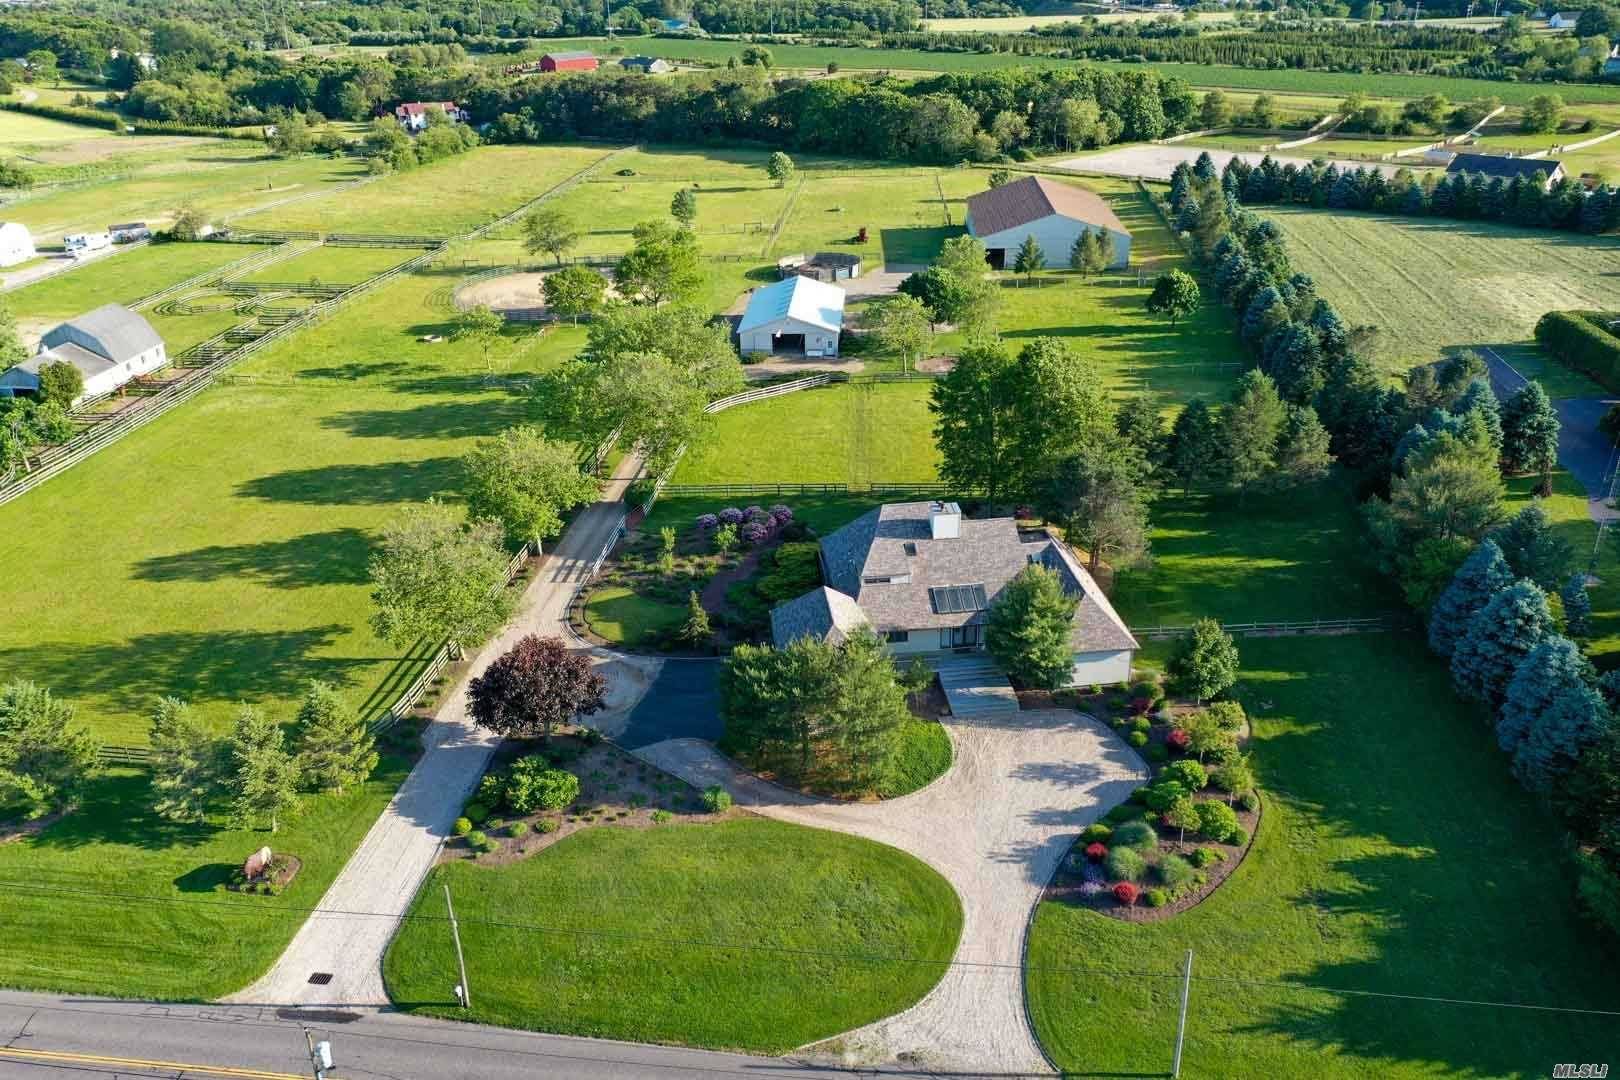 Wonderful opportunity to use this spectacular property amp ; custom built Residence as an Equestrian Center specializing in full service boarding, training and showing !